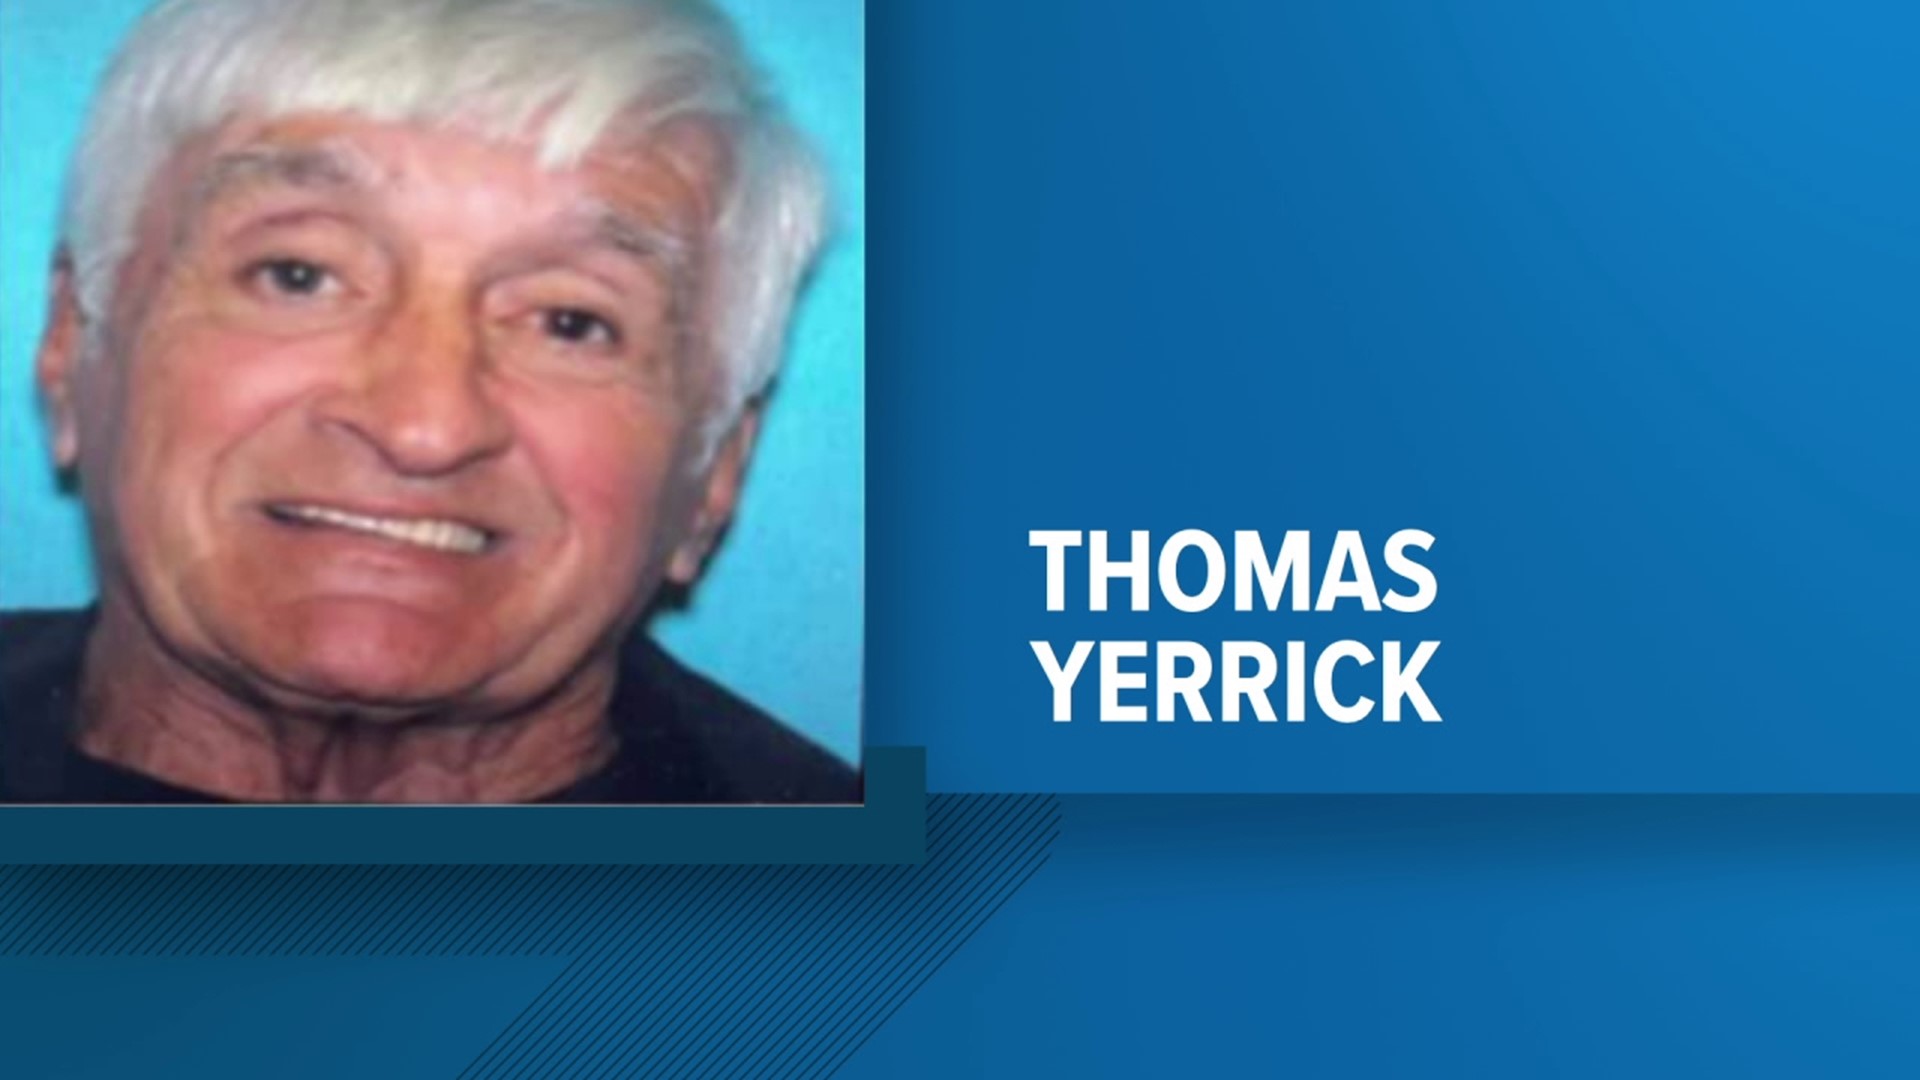 We now know the body recovered from the Lackawanna River Tuesday was that of Thomas Yerrick.